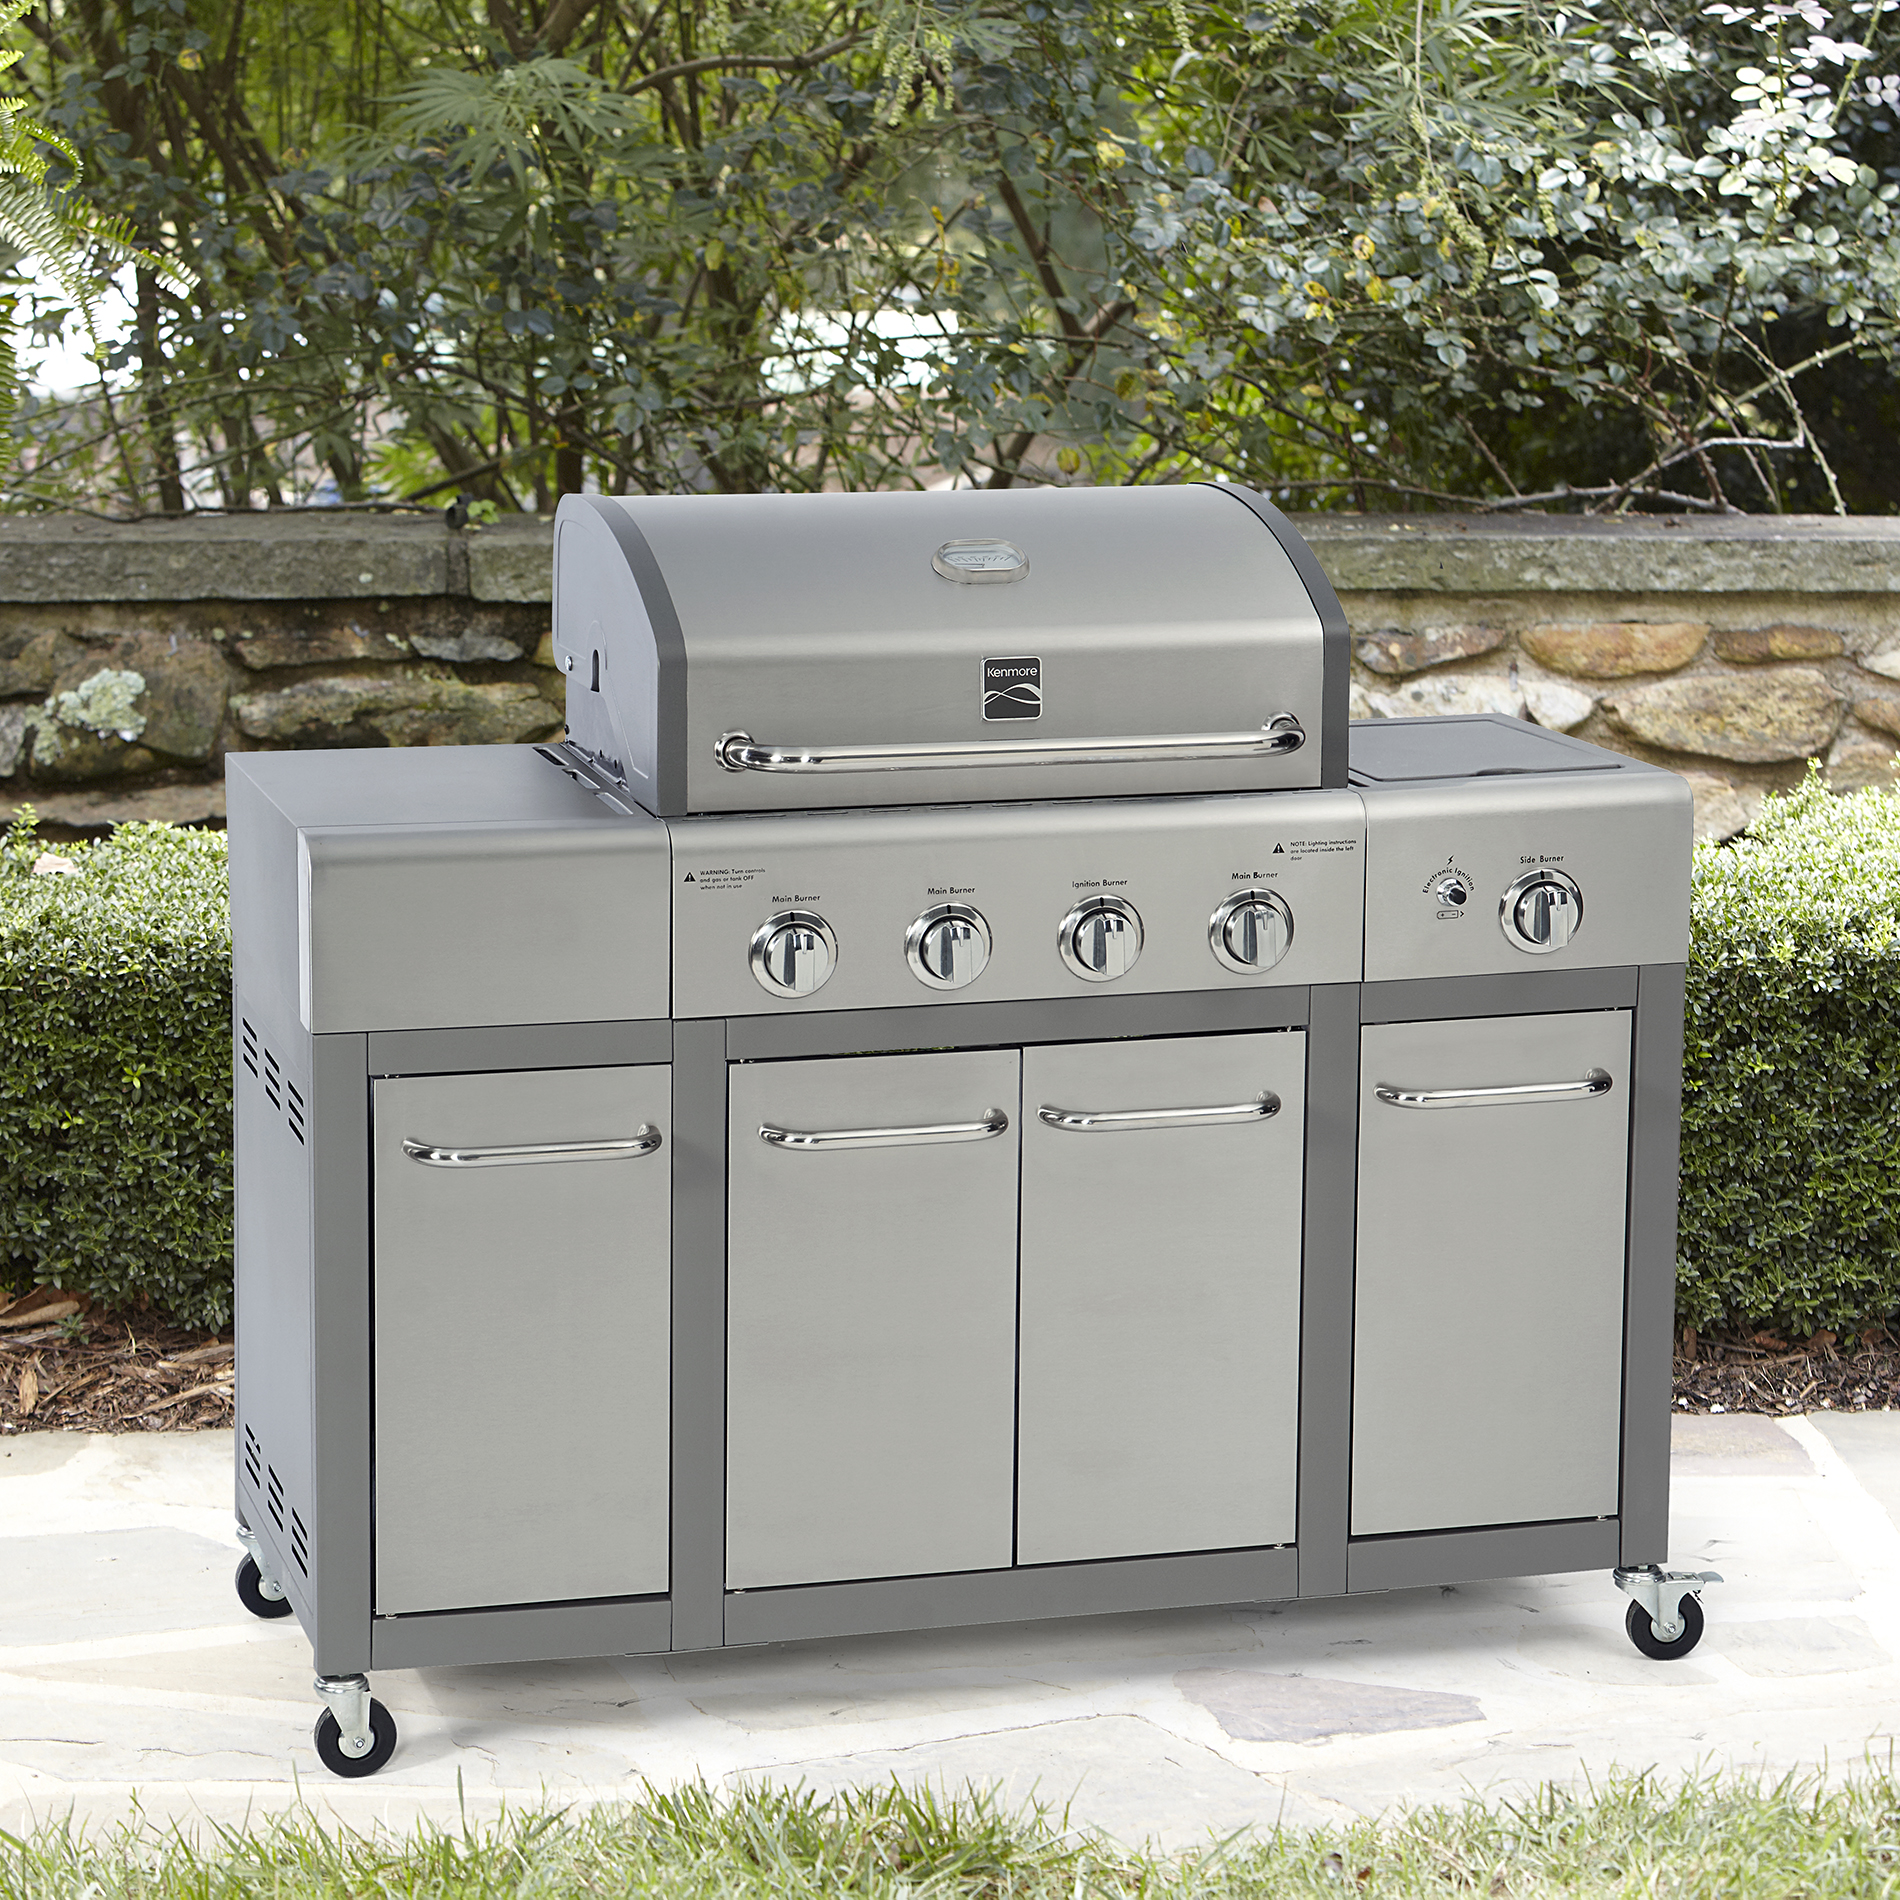 Tips for Choosing the Gas Grill